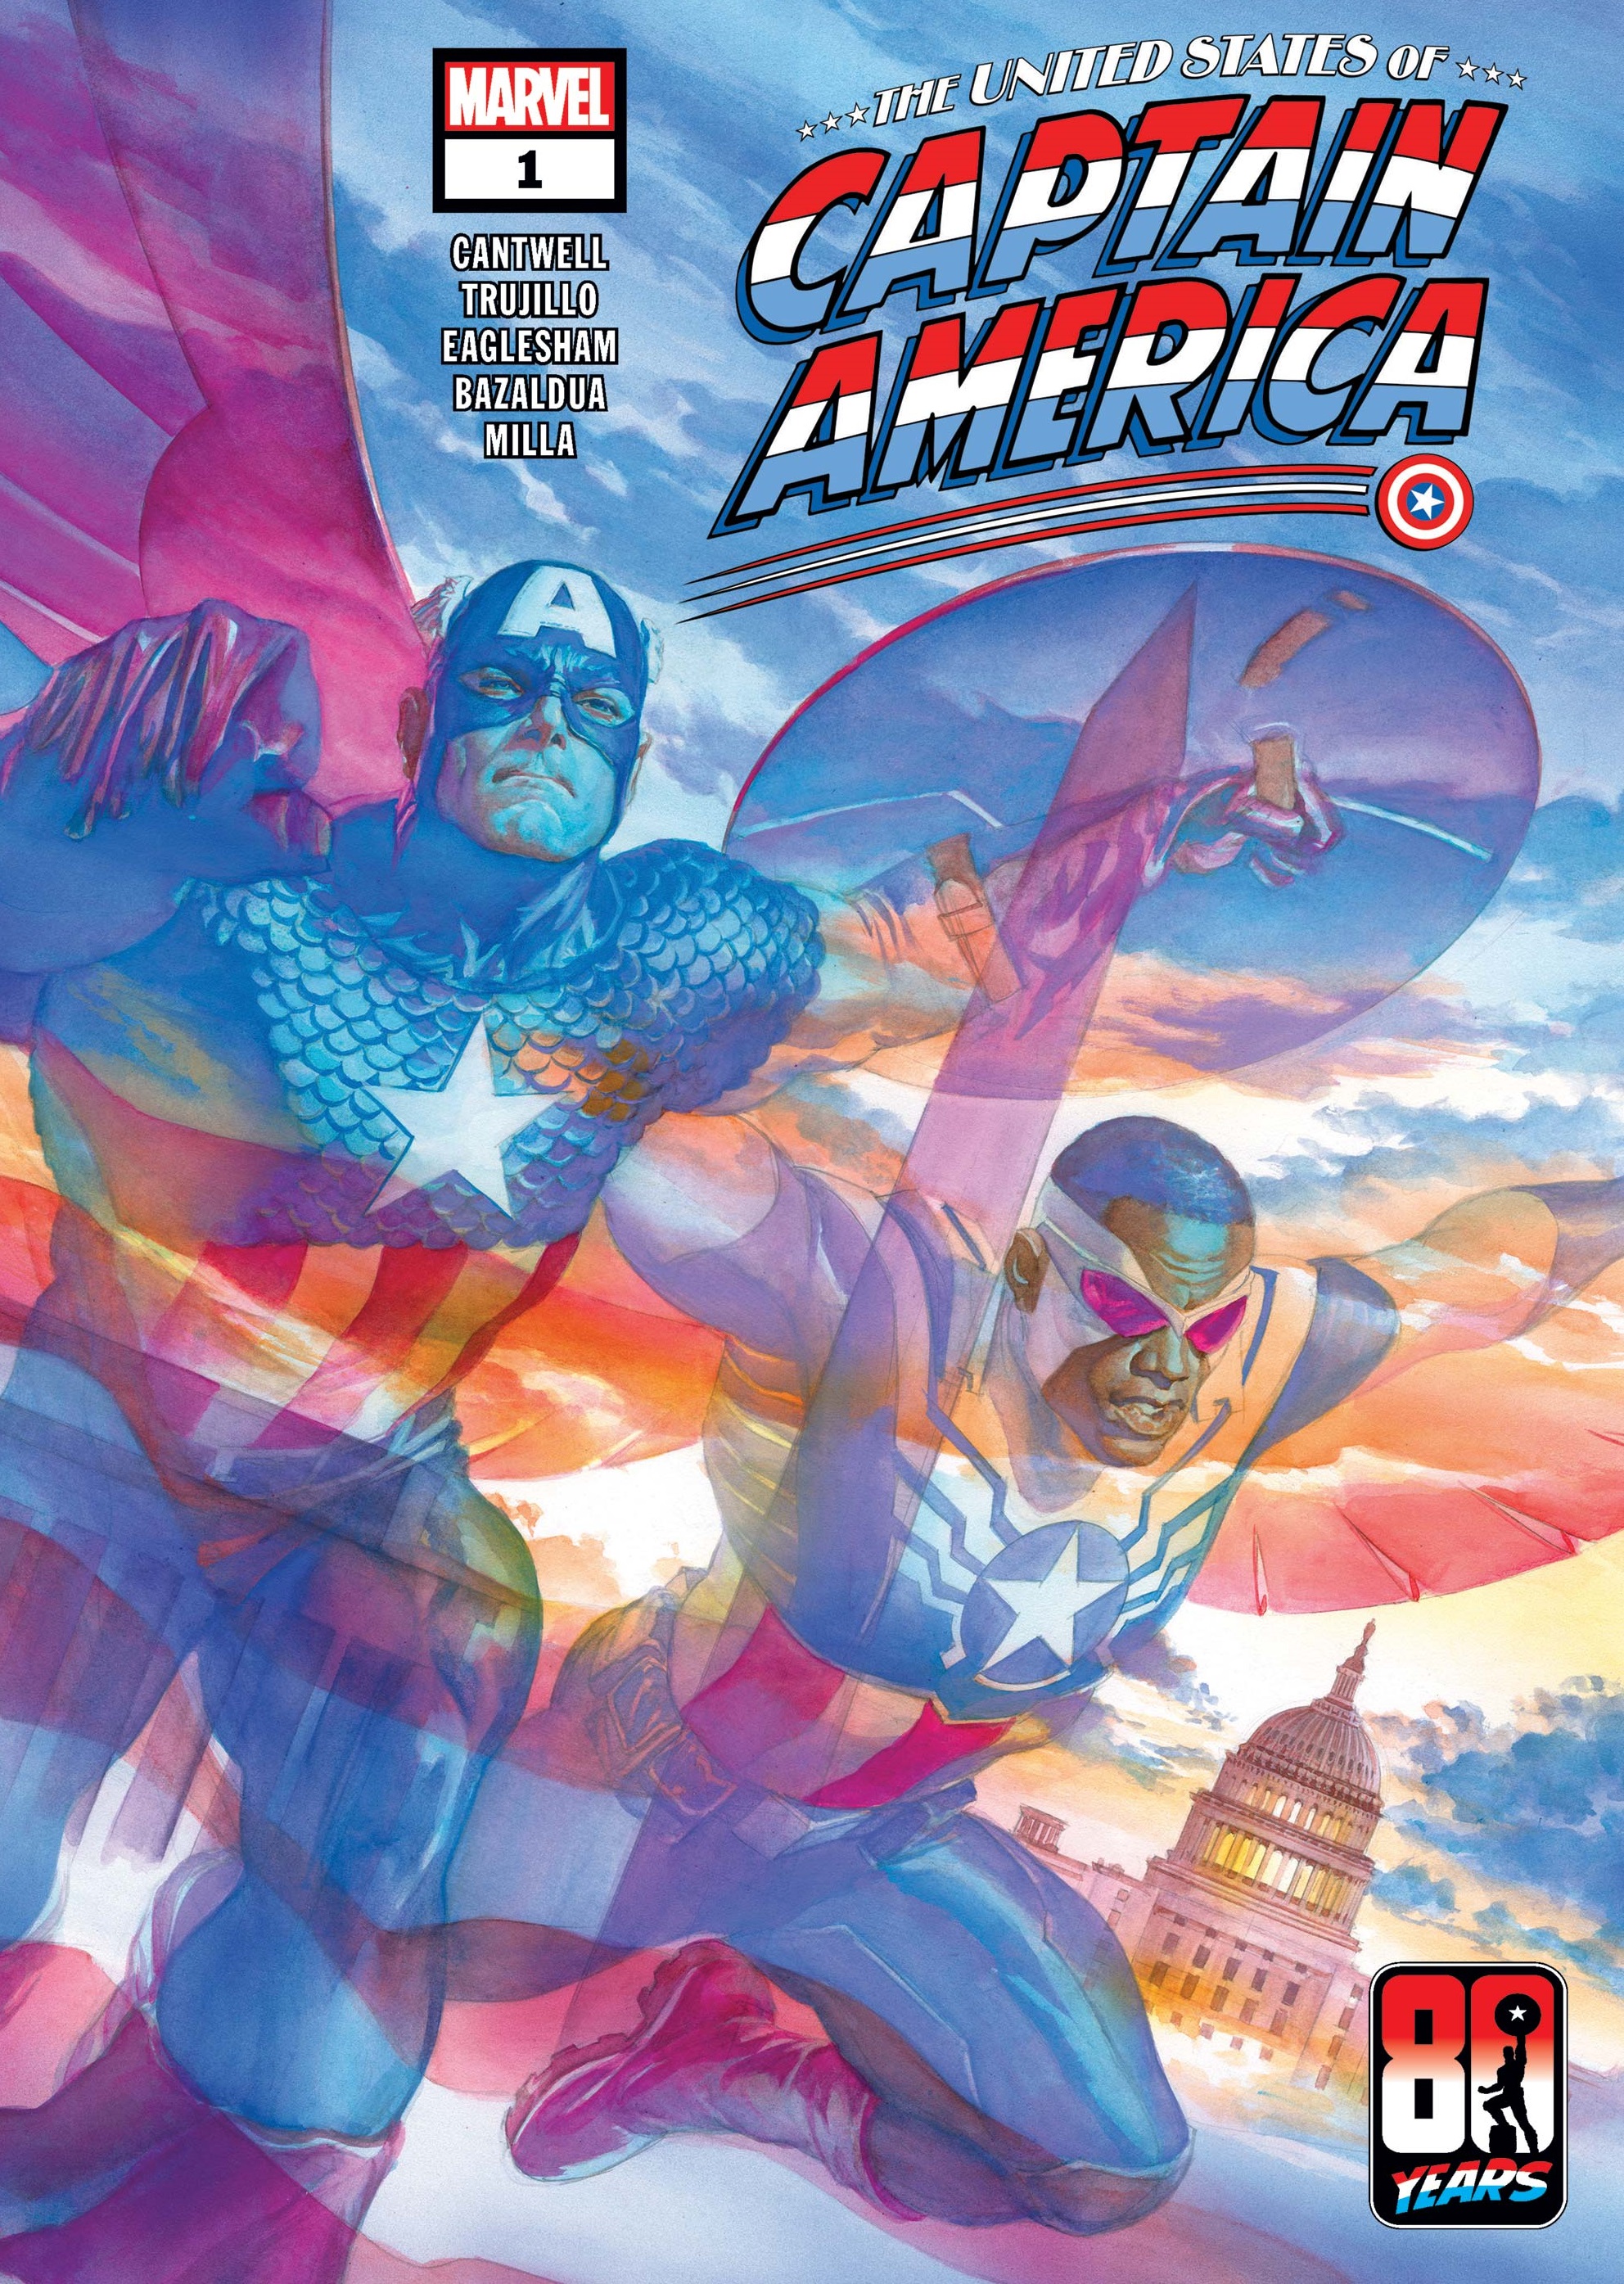 The United States of Captain America (2021) #1